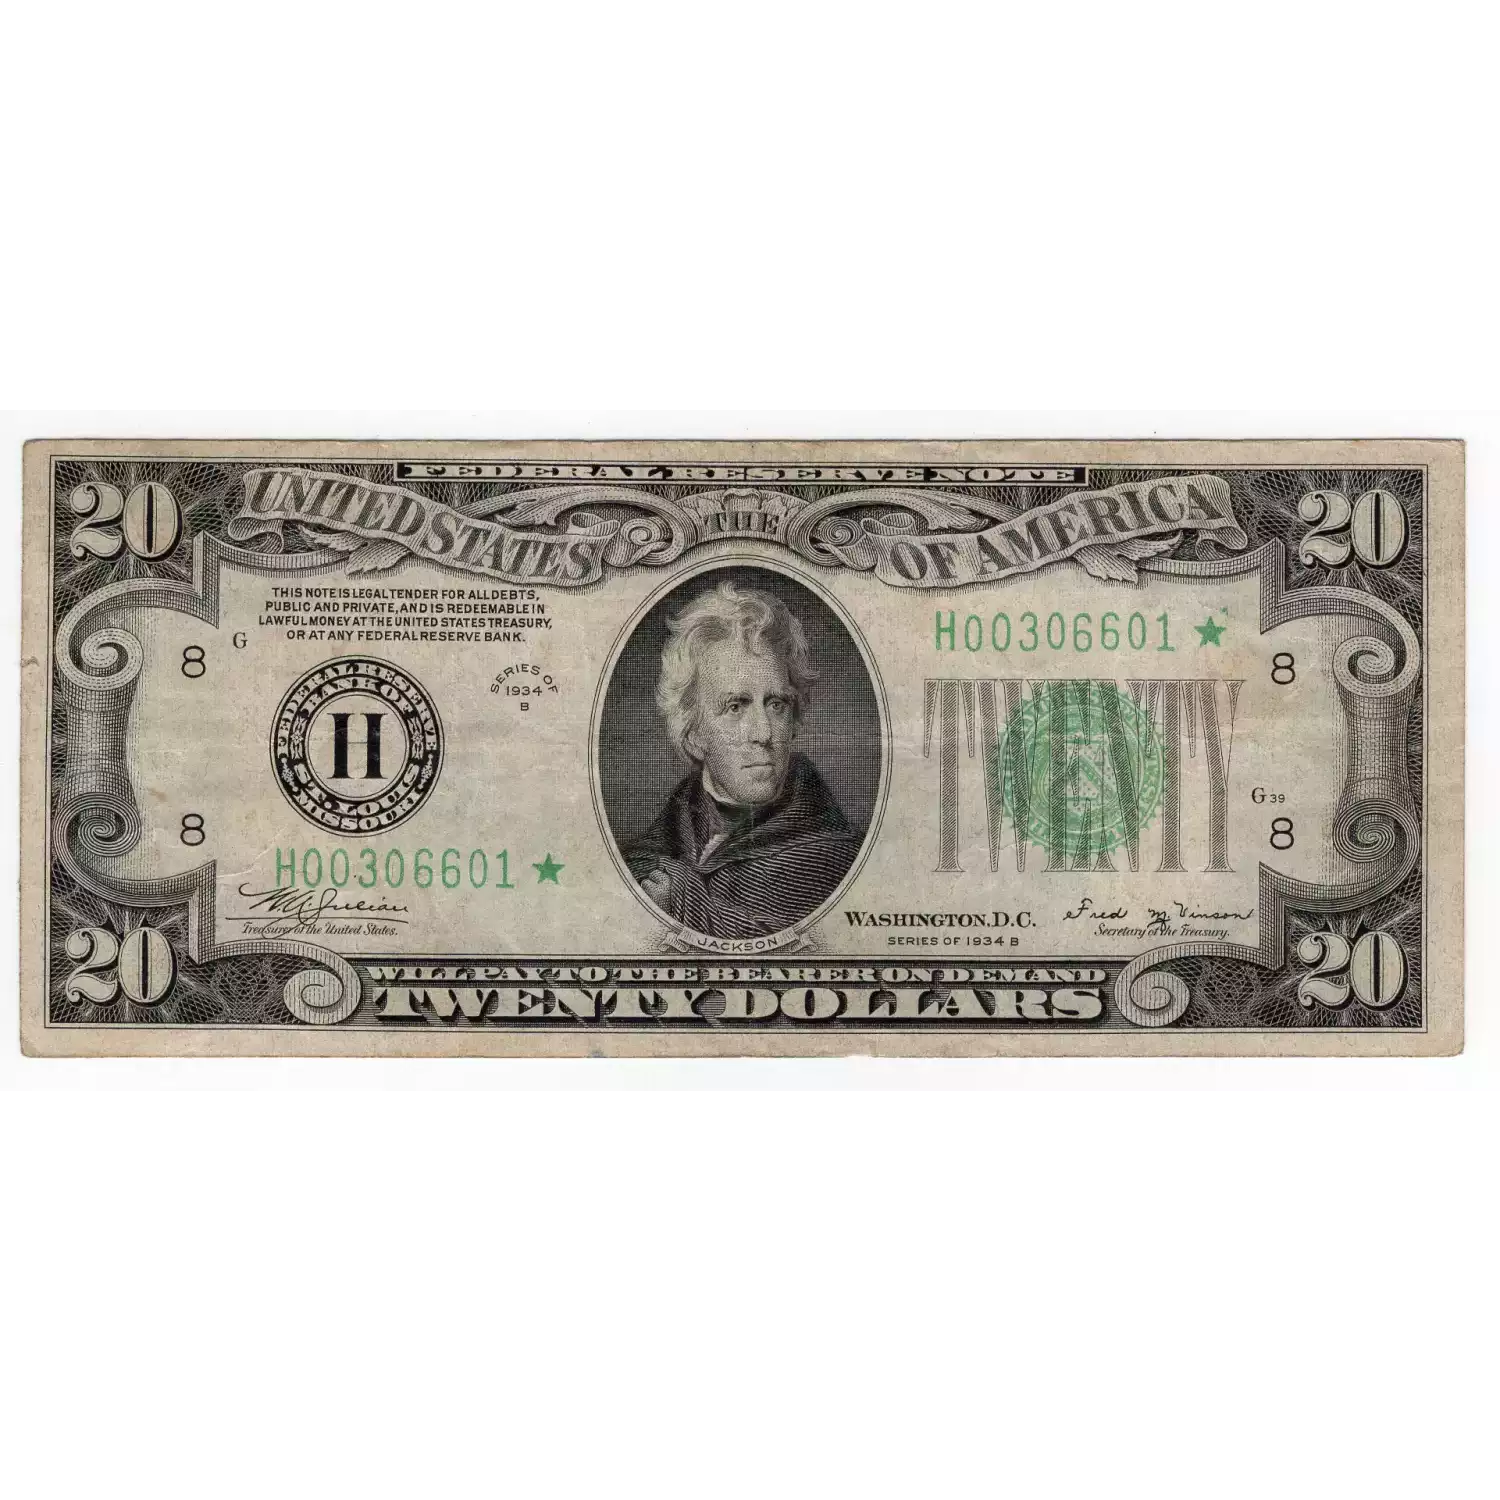 $20 1934-B. blue-Green seal. Small Size $20 Federal Reserve Notes 2056-H*